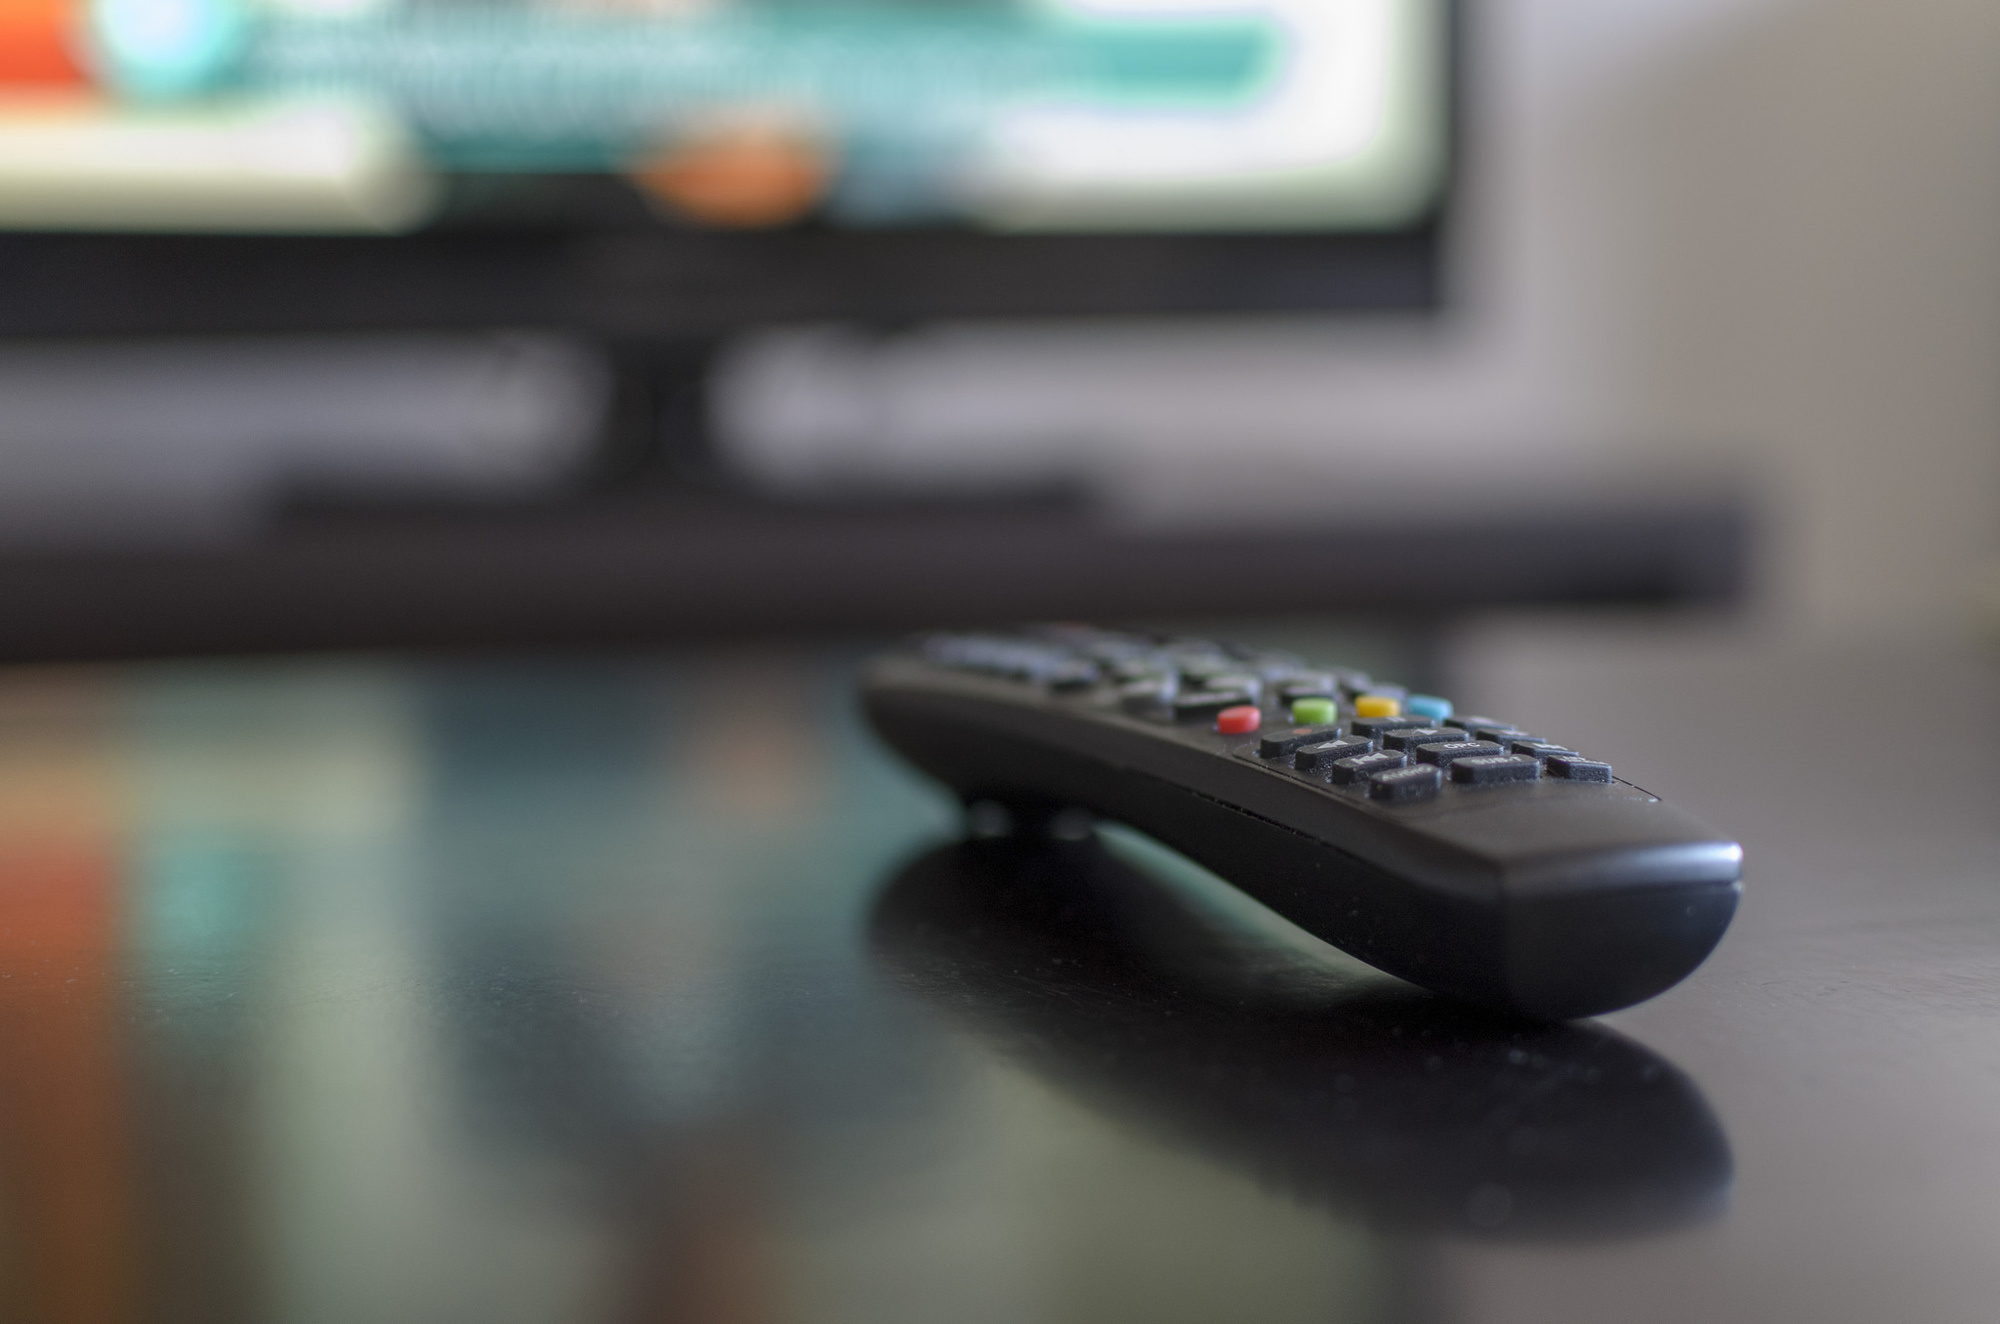 One study showed that the television remotes and bedside lamp switches are the least cleaned -- but they're also the most touched places in the room. In other words, it might be a good idea to bring some hand sanitizer if you plan to watch TV.